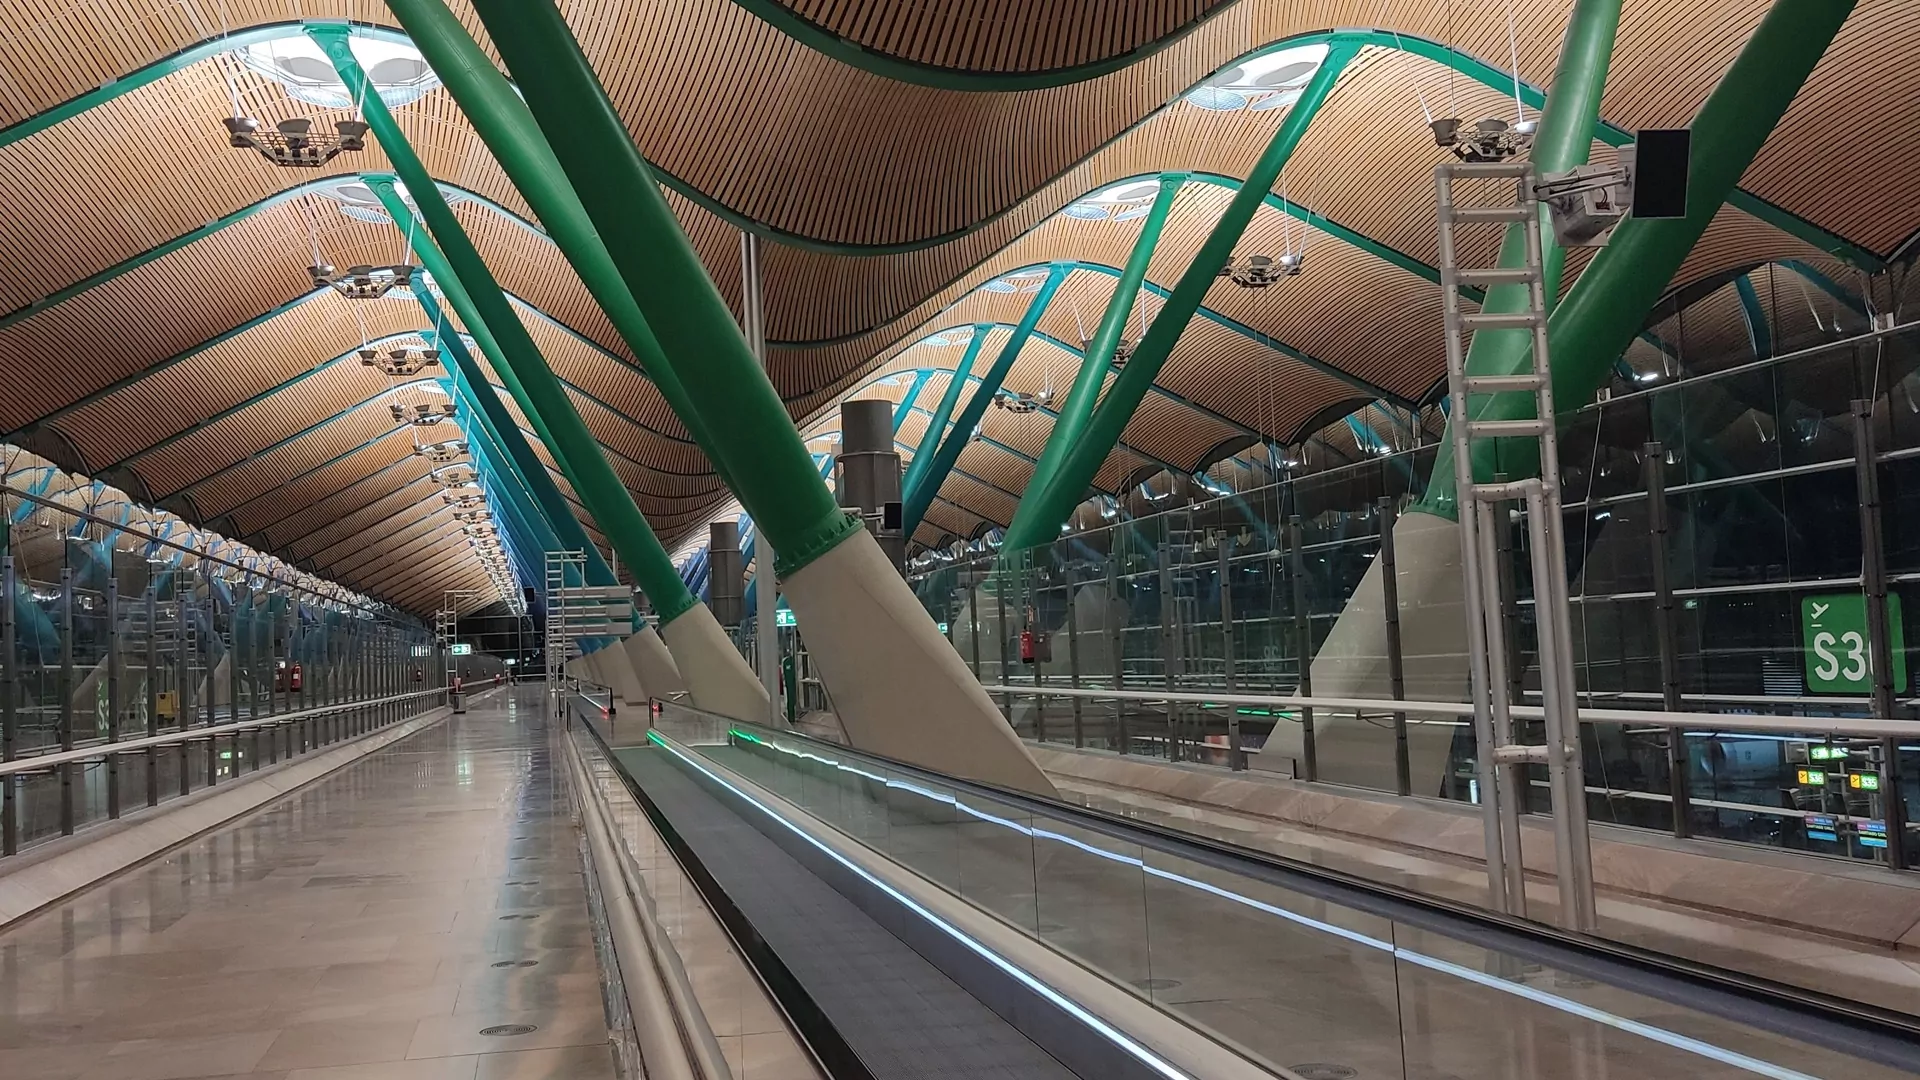 Ayesa wins major contract for Madrid-Barajas Airport